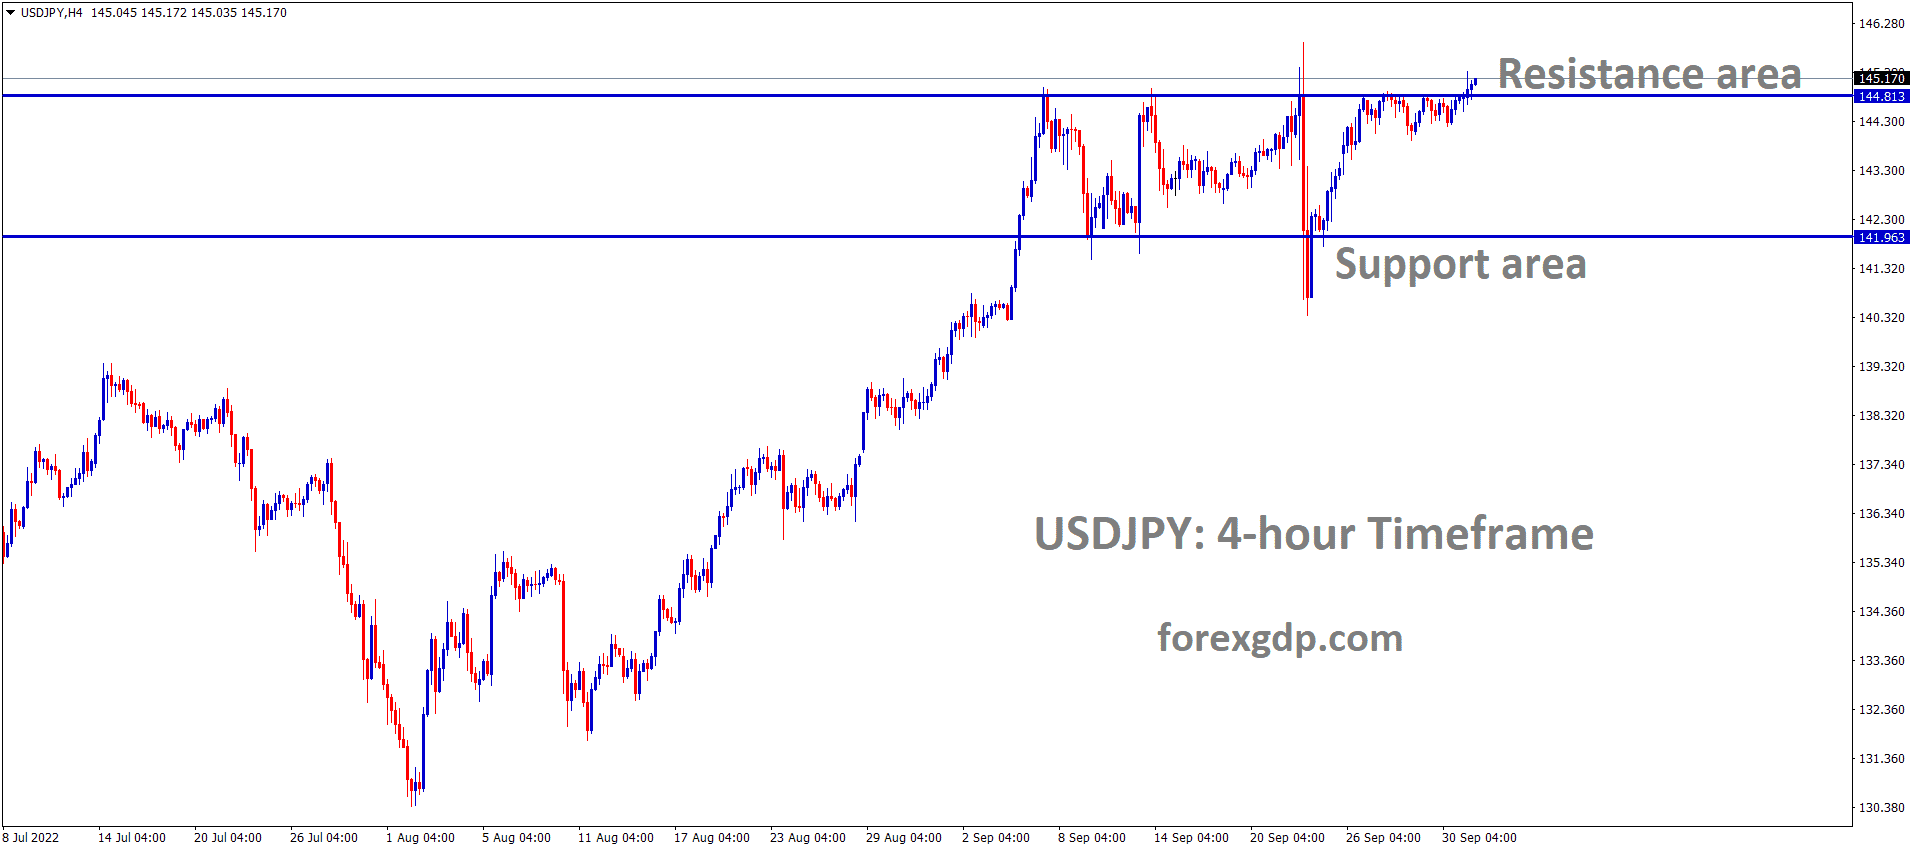 USDJPY is moving in the Box pattern and the market has reached the resistance area of the pattern